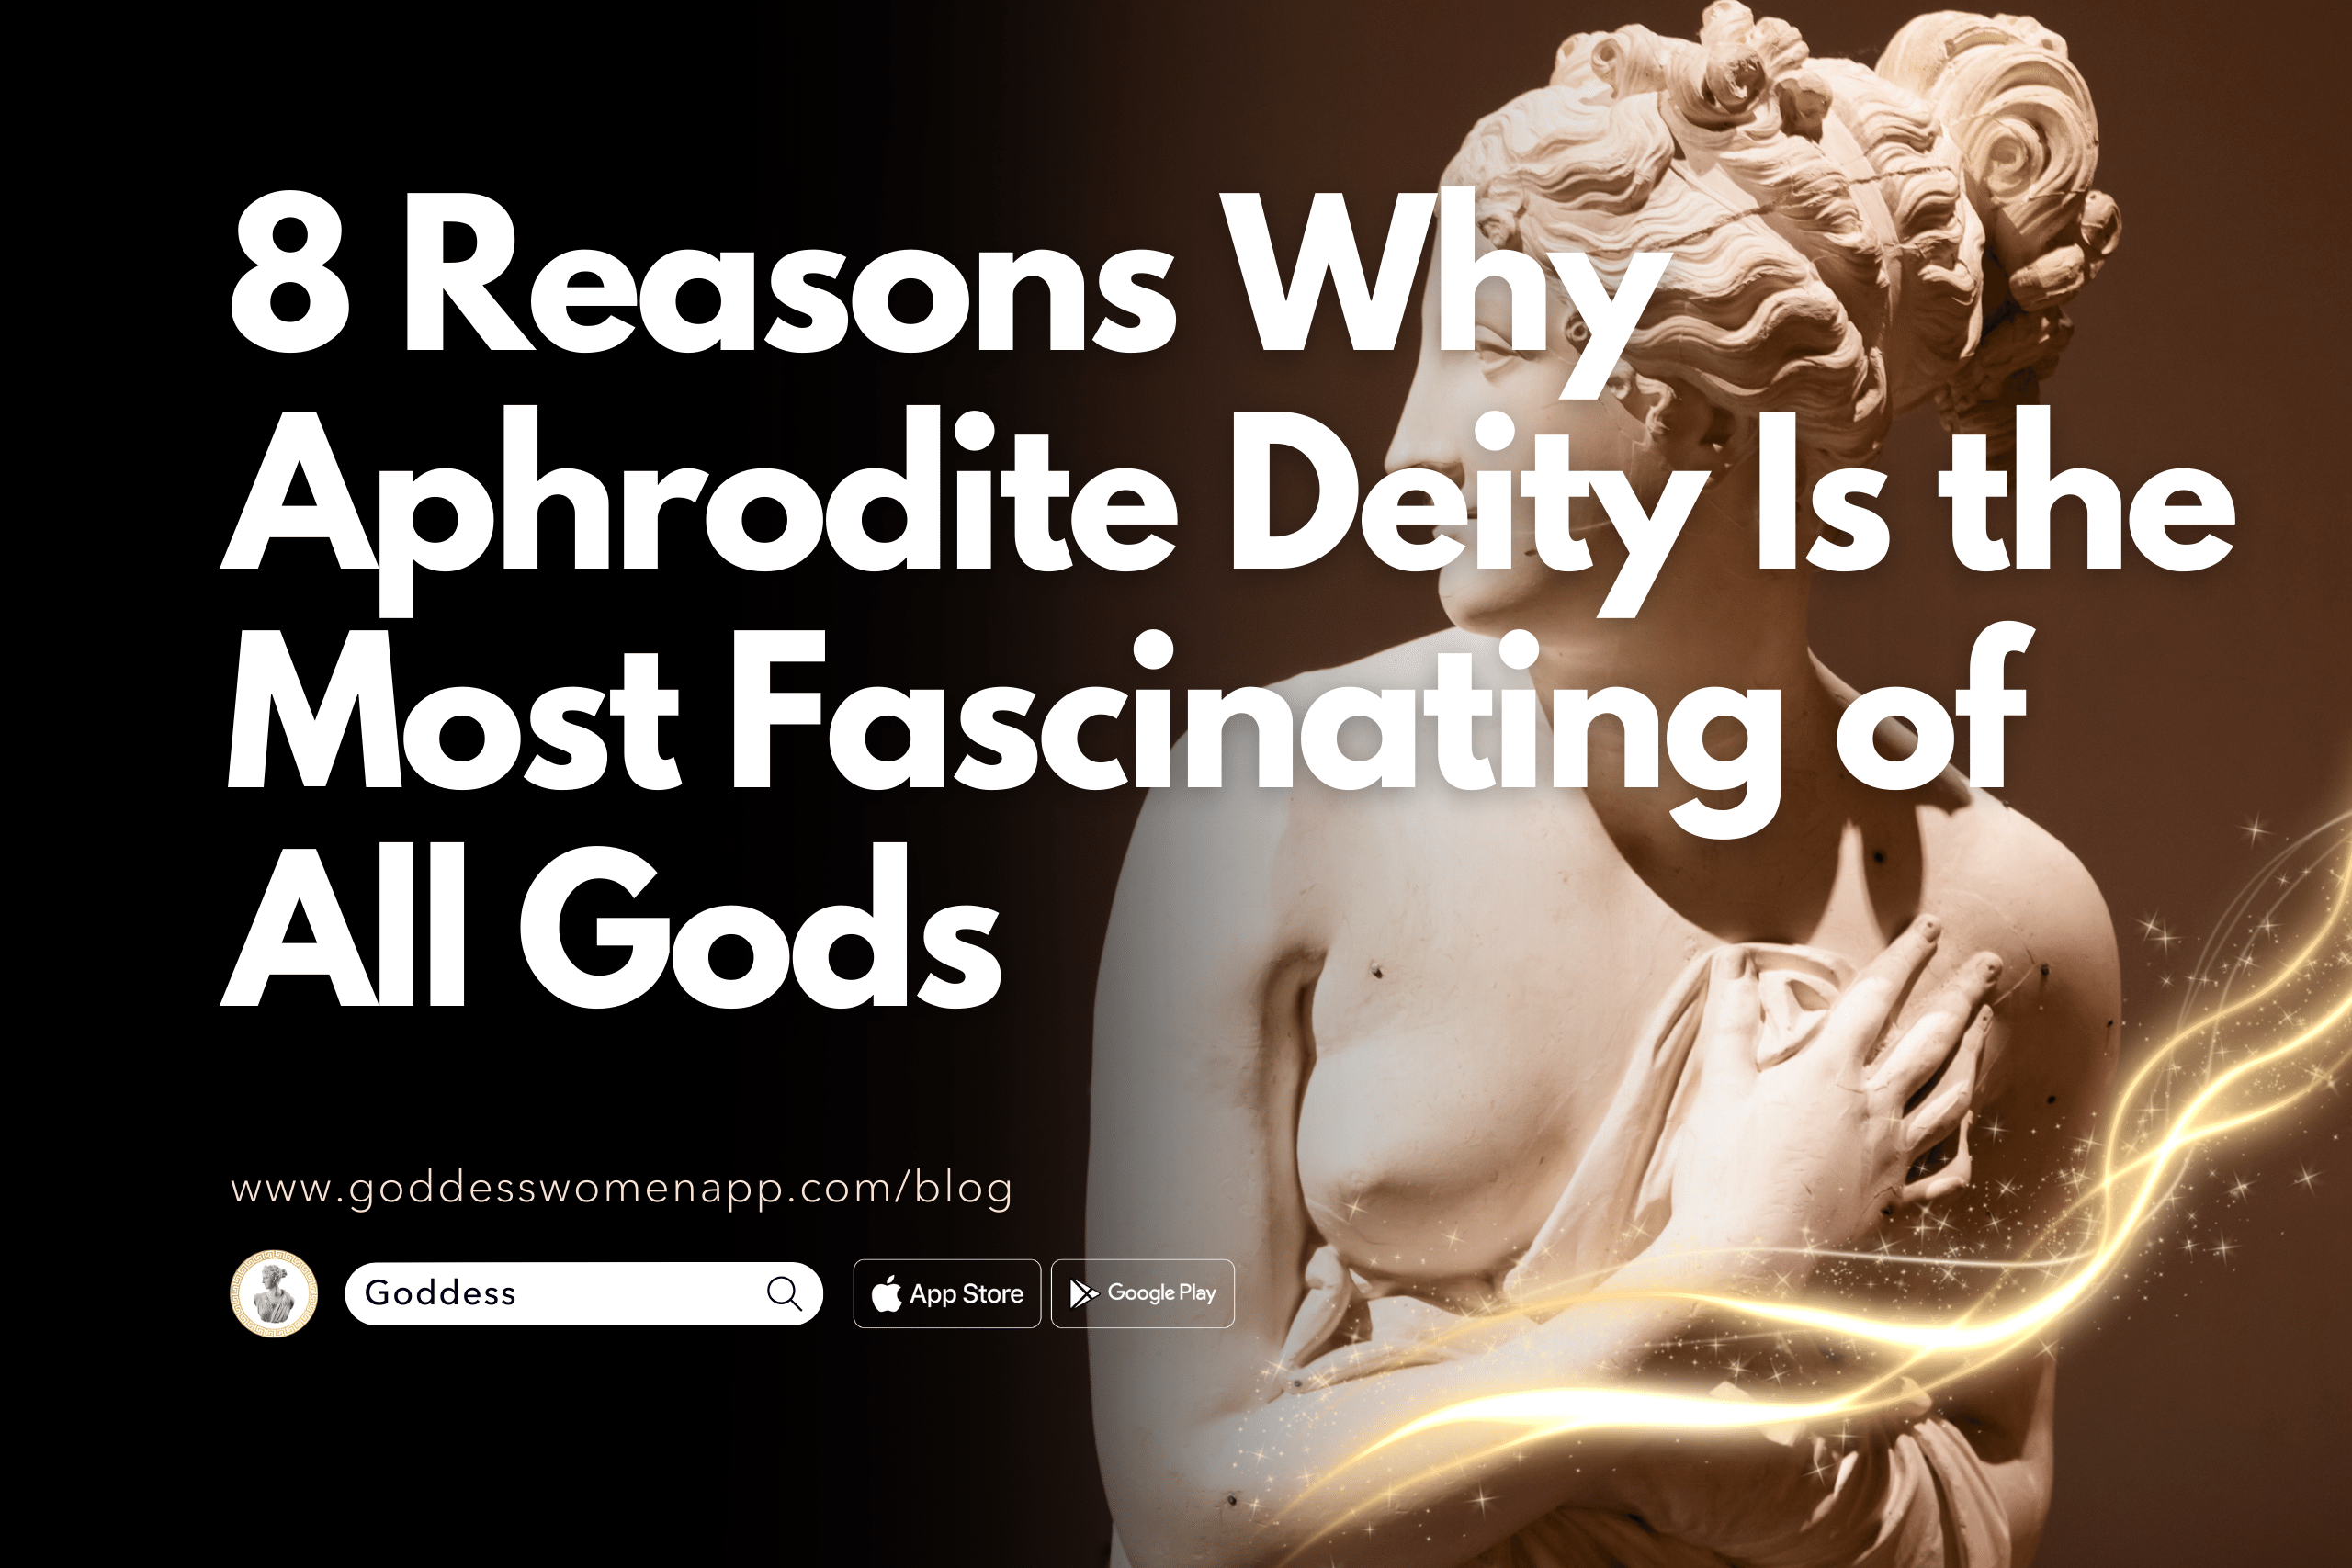 8 Reasons Why Aphrodite Deity Is the Most Fascinating of All Gods